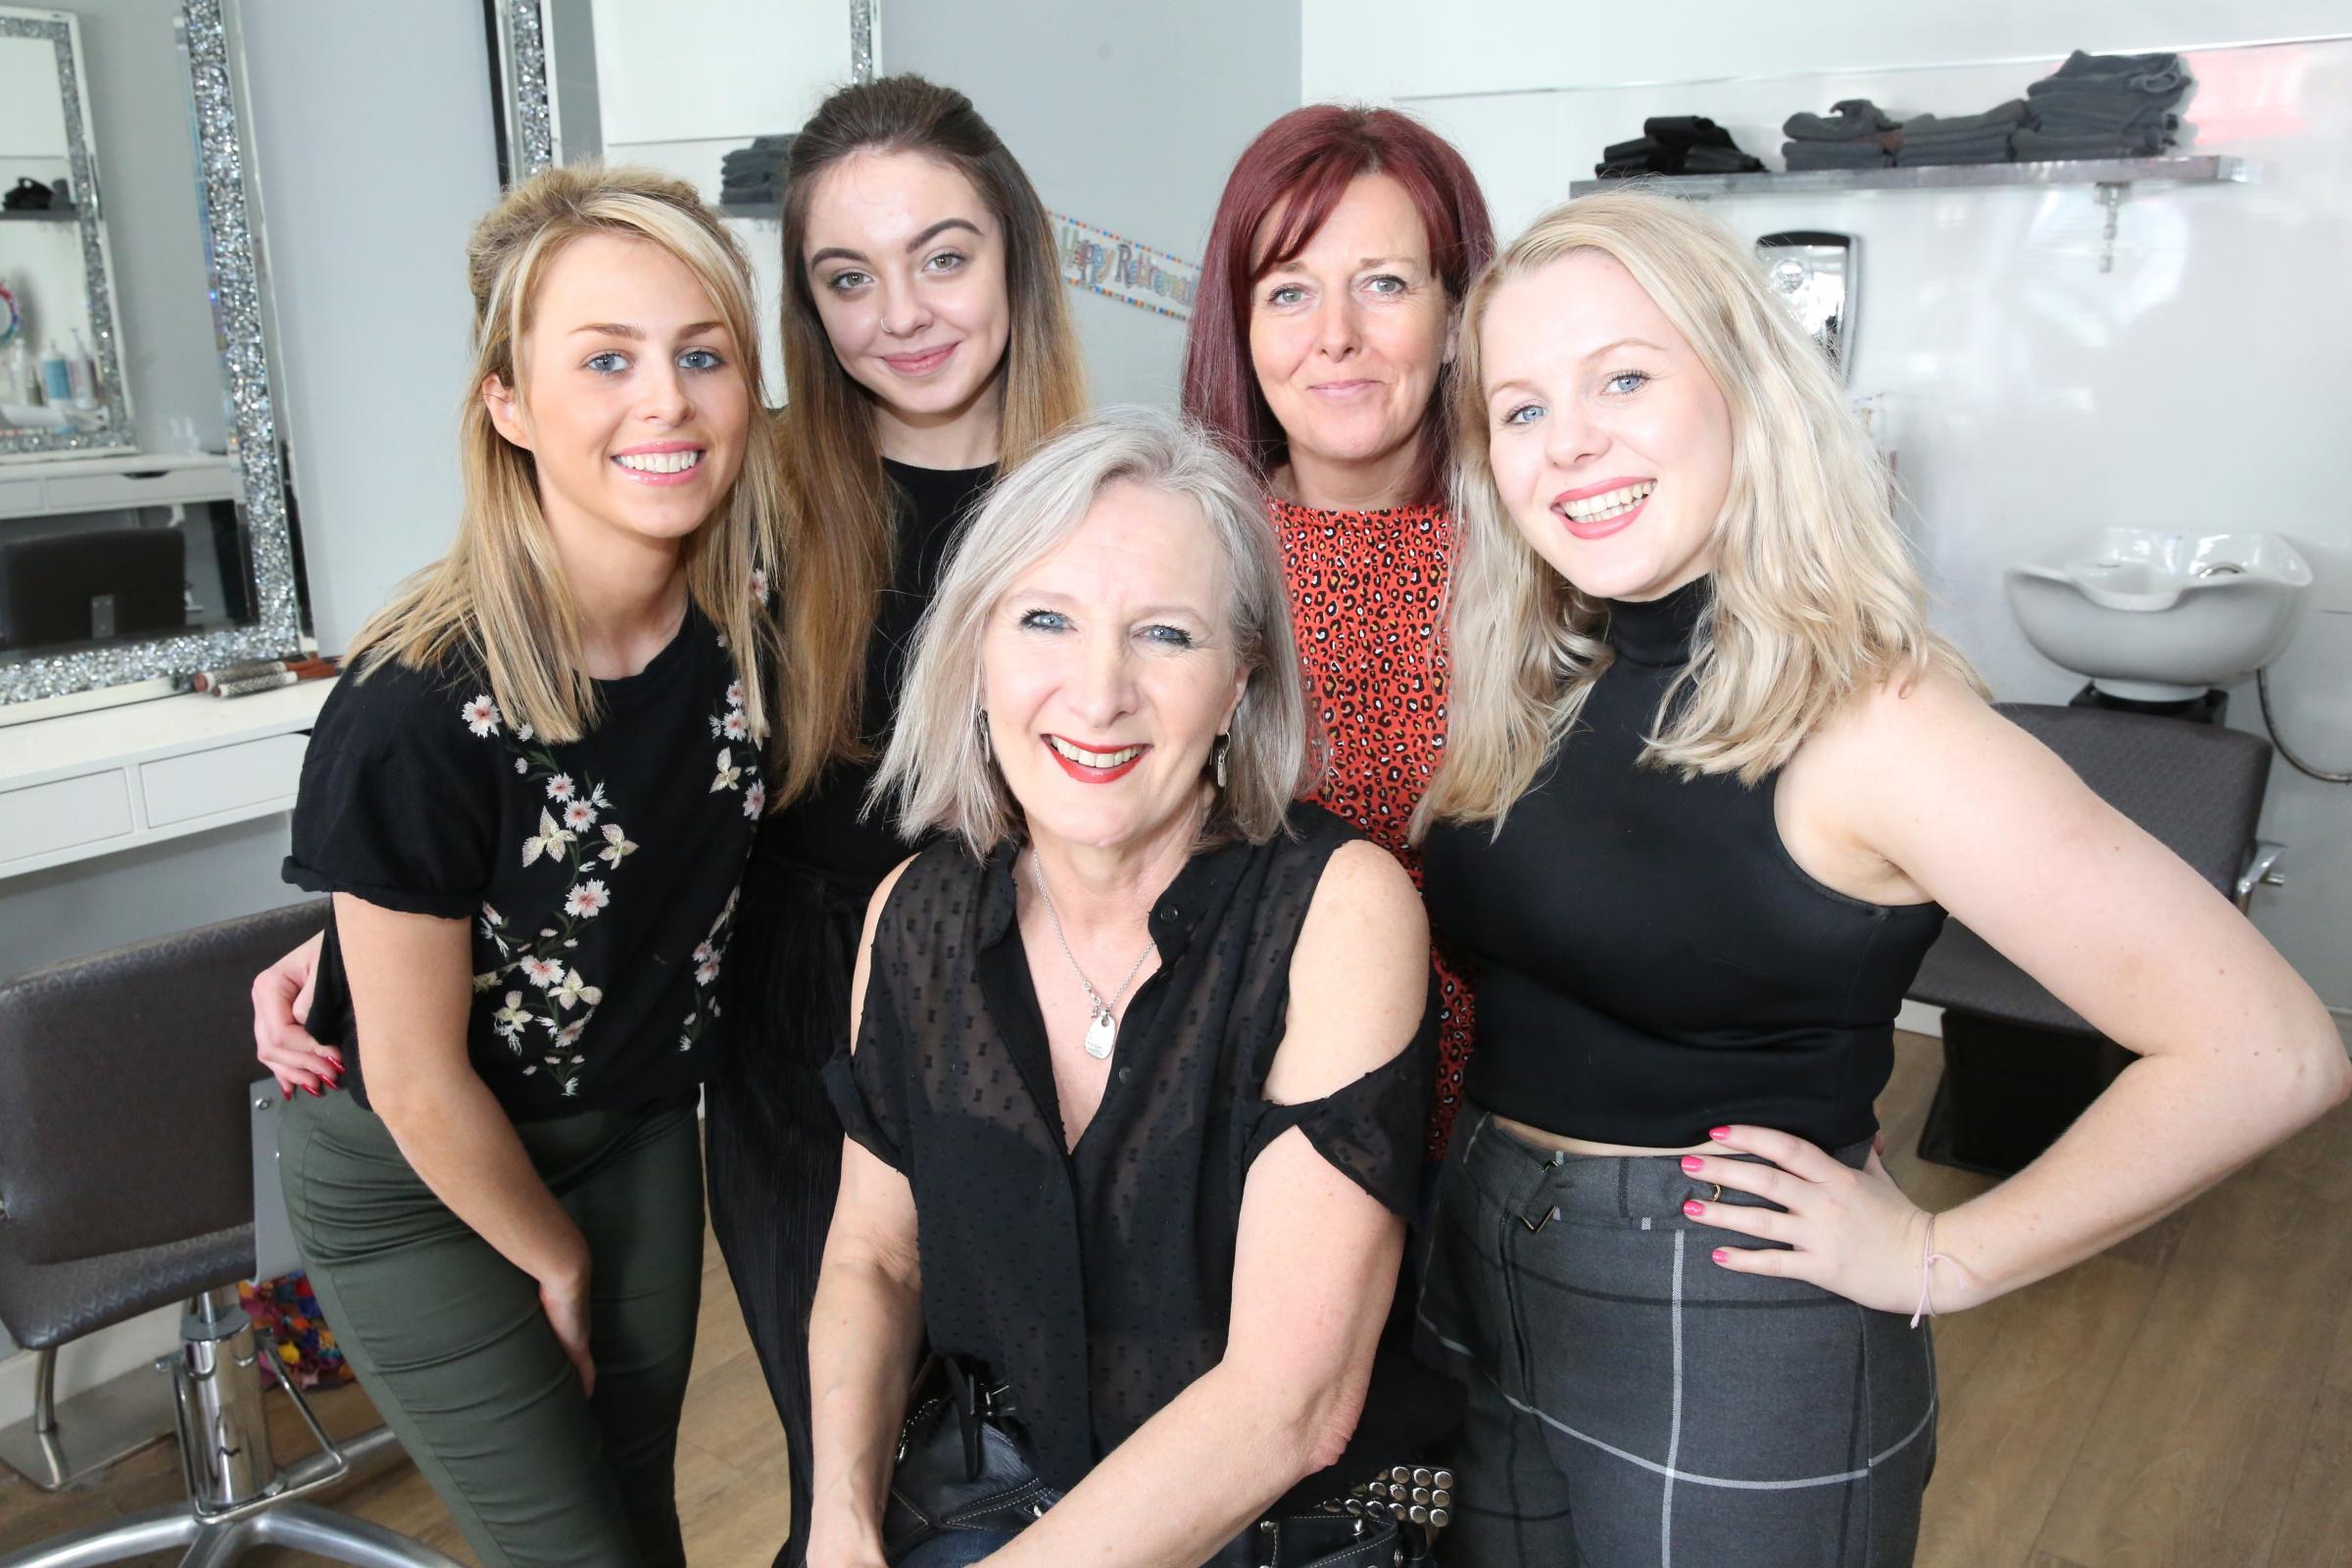 Hairdresser Who Has Proved A Cut Above For 45 Years Says Fond